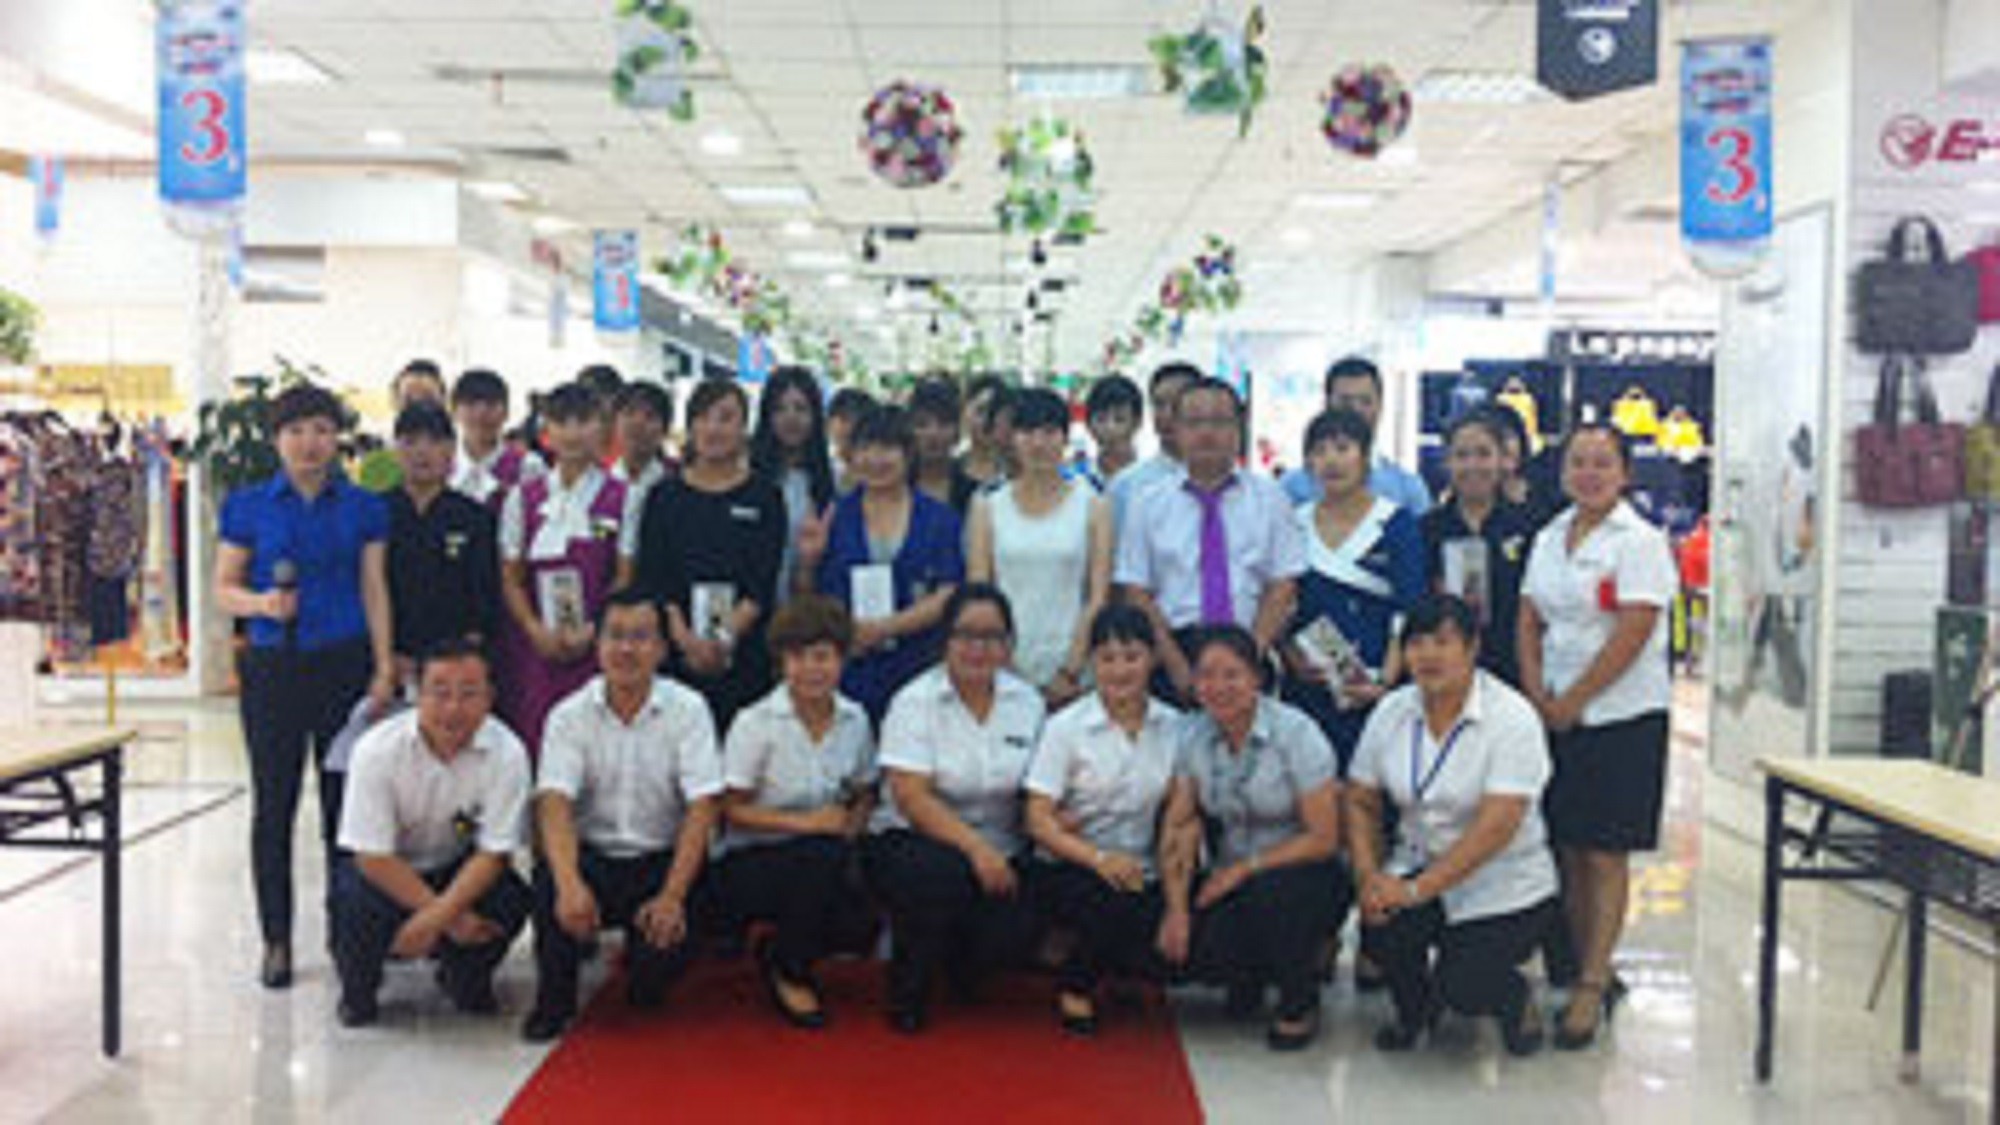 SPAR Beijing service skill practice campaign rolled out in store(1)